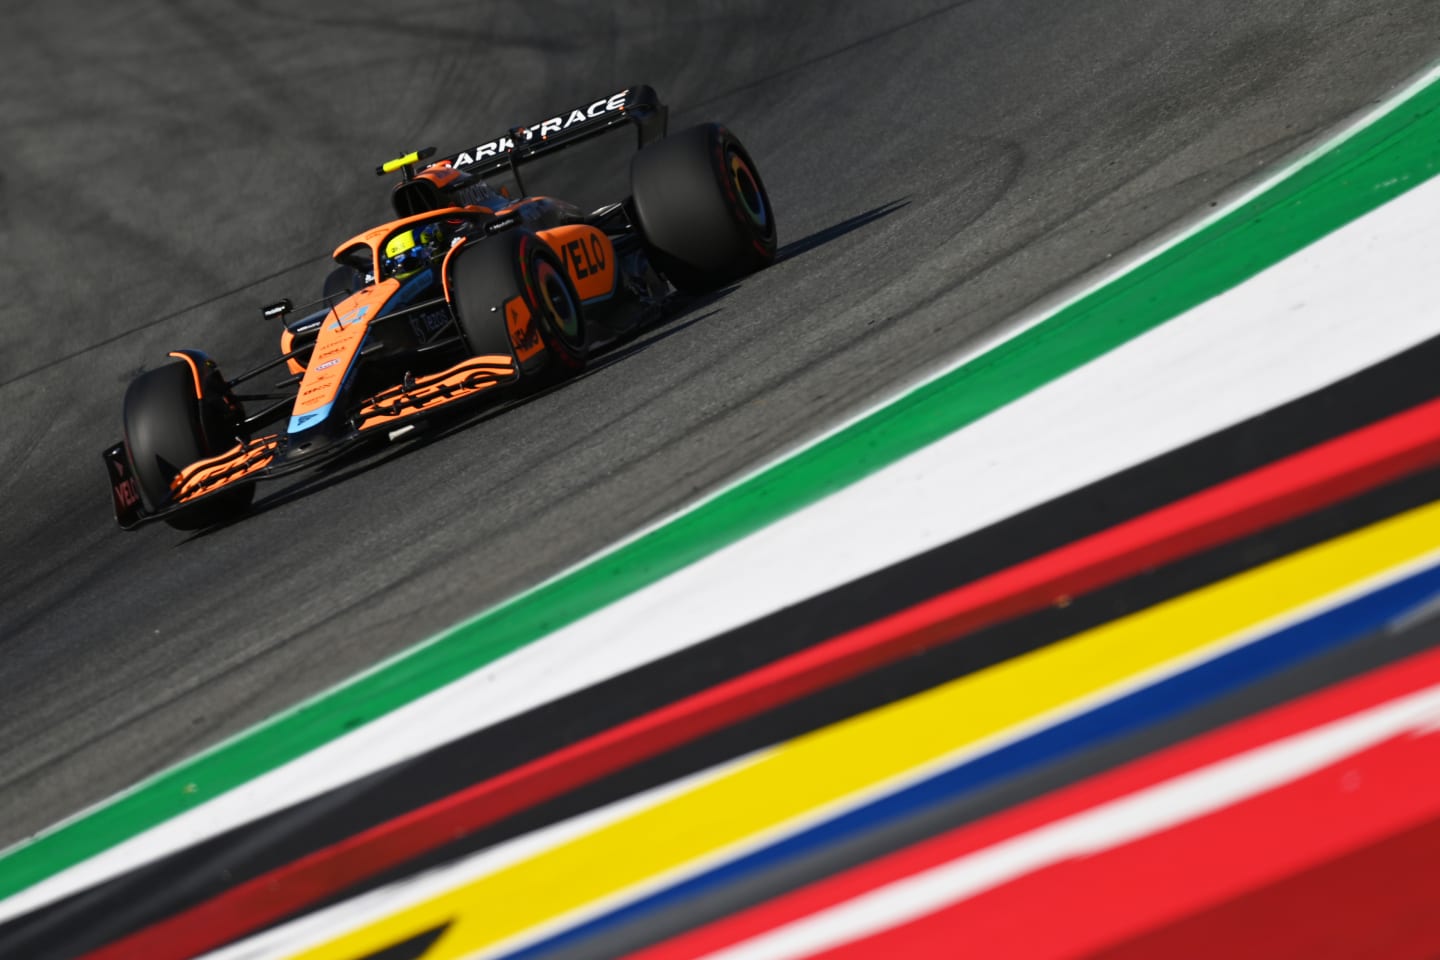 MONZA, ITALY - SEPTEMBER 10: Lando Norris of Great Britain driving the (4) McLaren MCL36 Mercedes on track during qualifying ahead of the F1 Grand Prix of Italy at Autodromo Nazionale Monza on September 10, 2022 in Monza, Italy. (Photo by Dan Mullan/Getty Images)